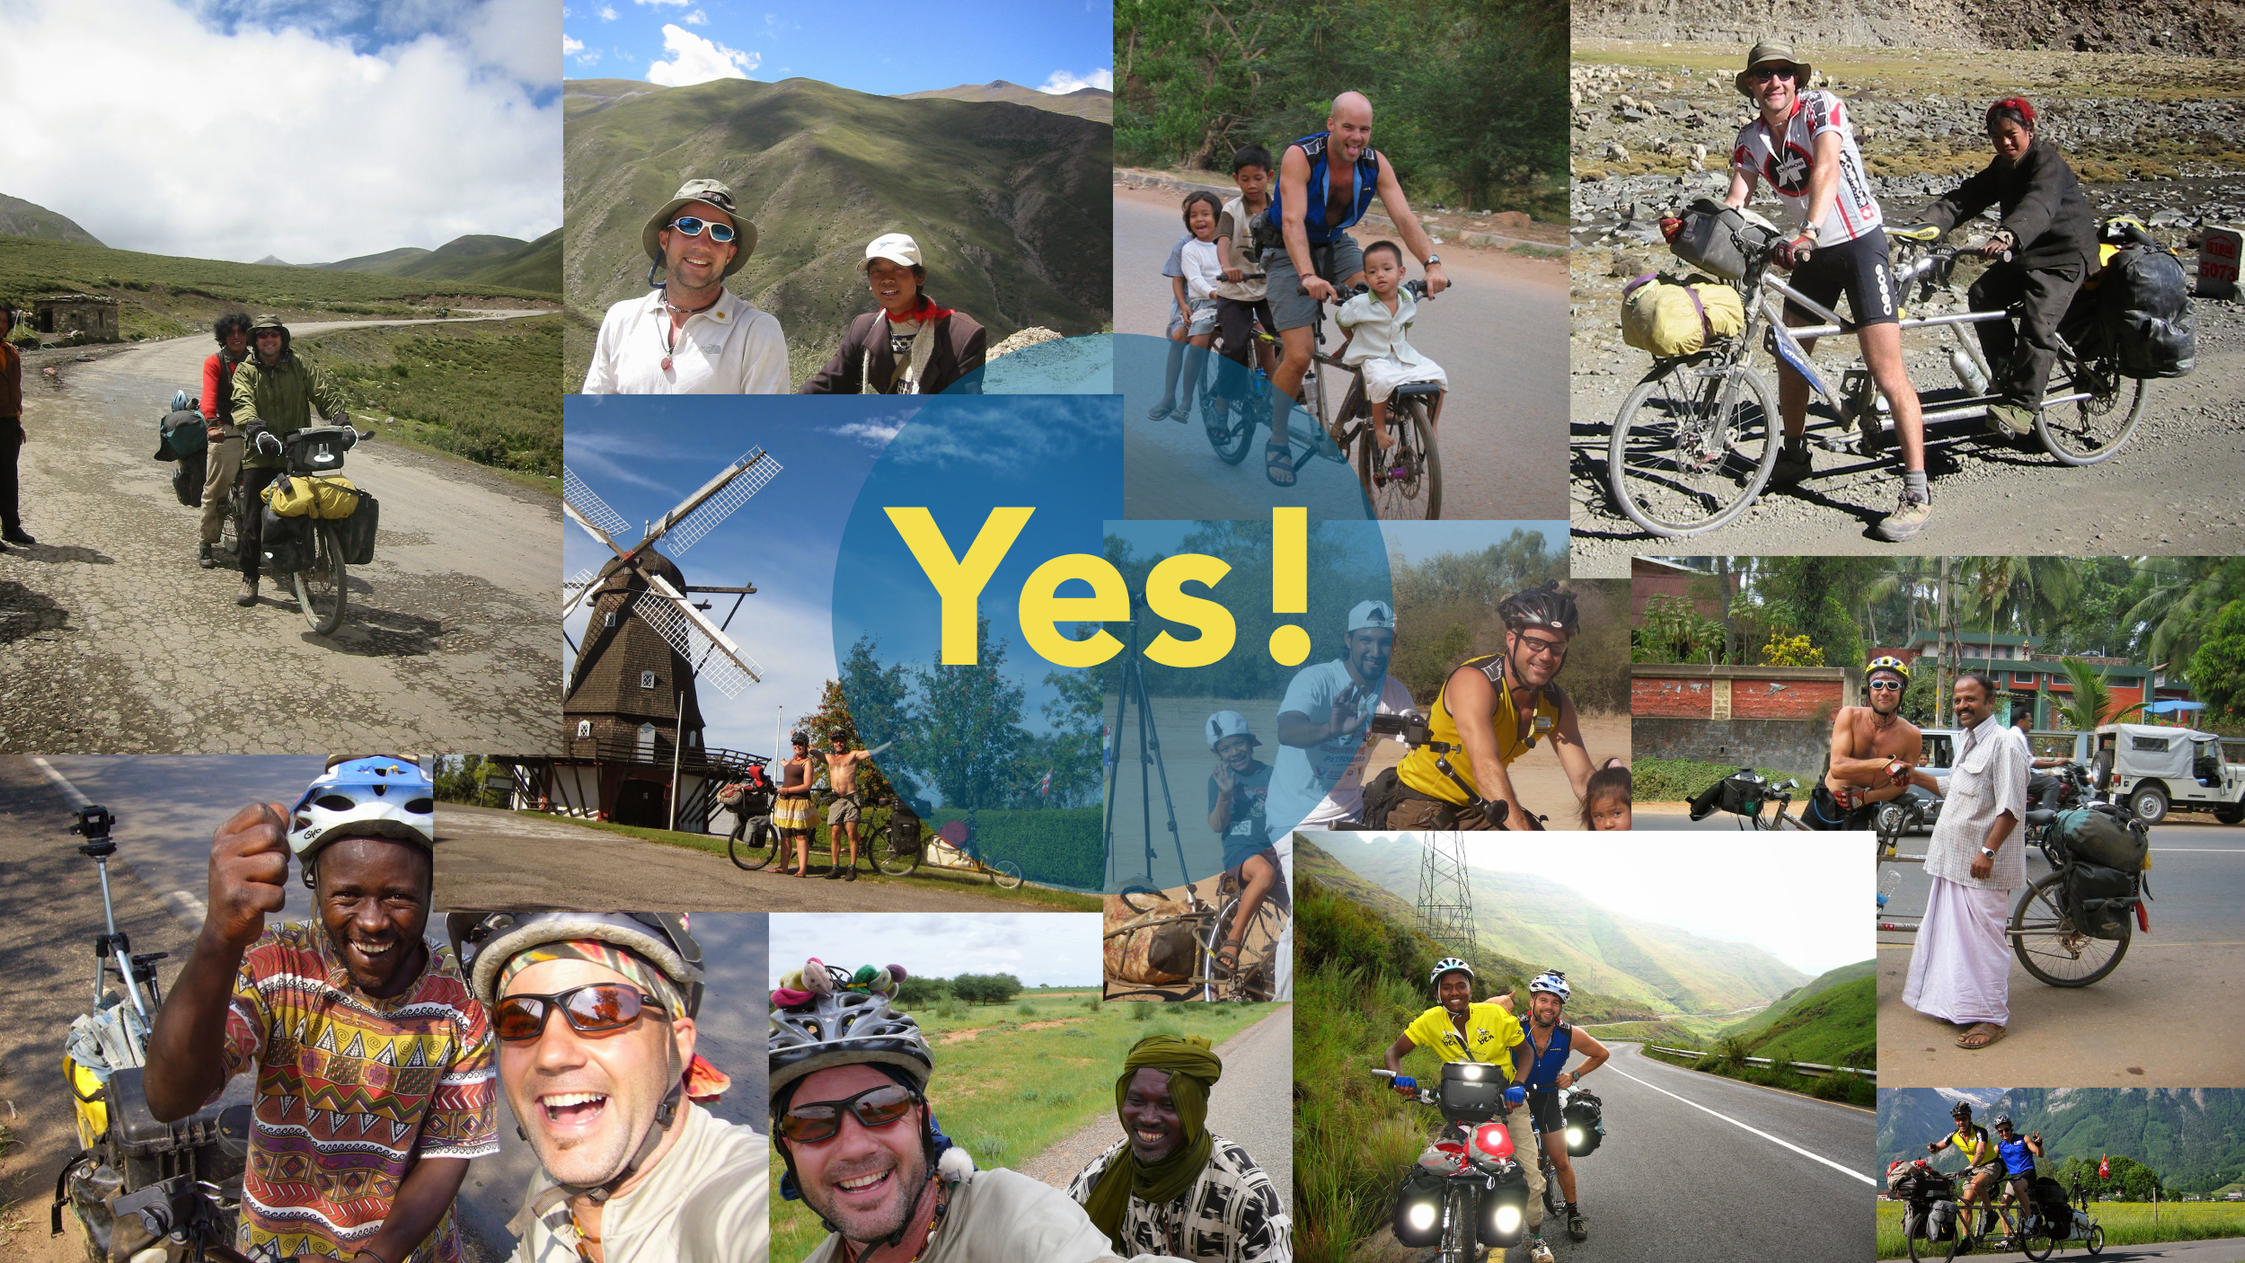 Collage of photos of PIE founder biking around the world with smiling locals, and a graphic of Yes! in the middle